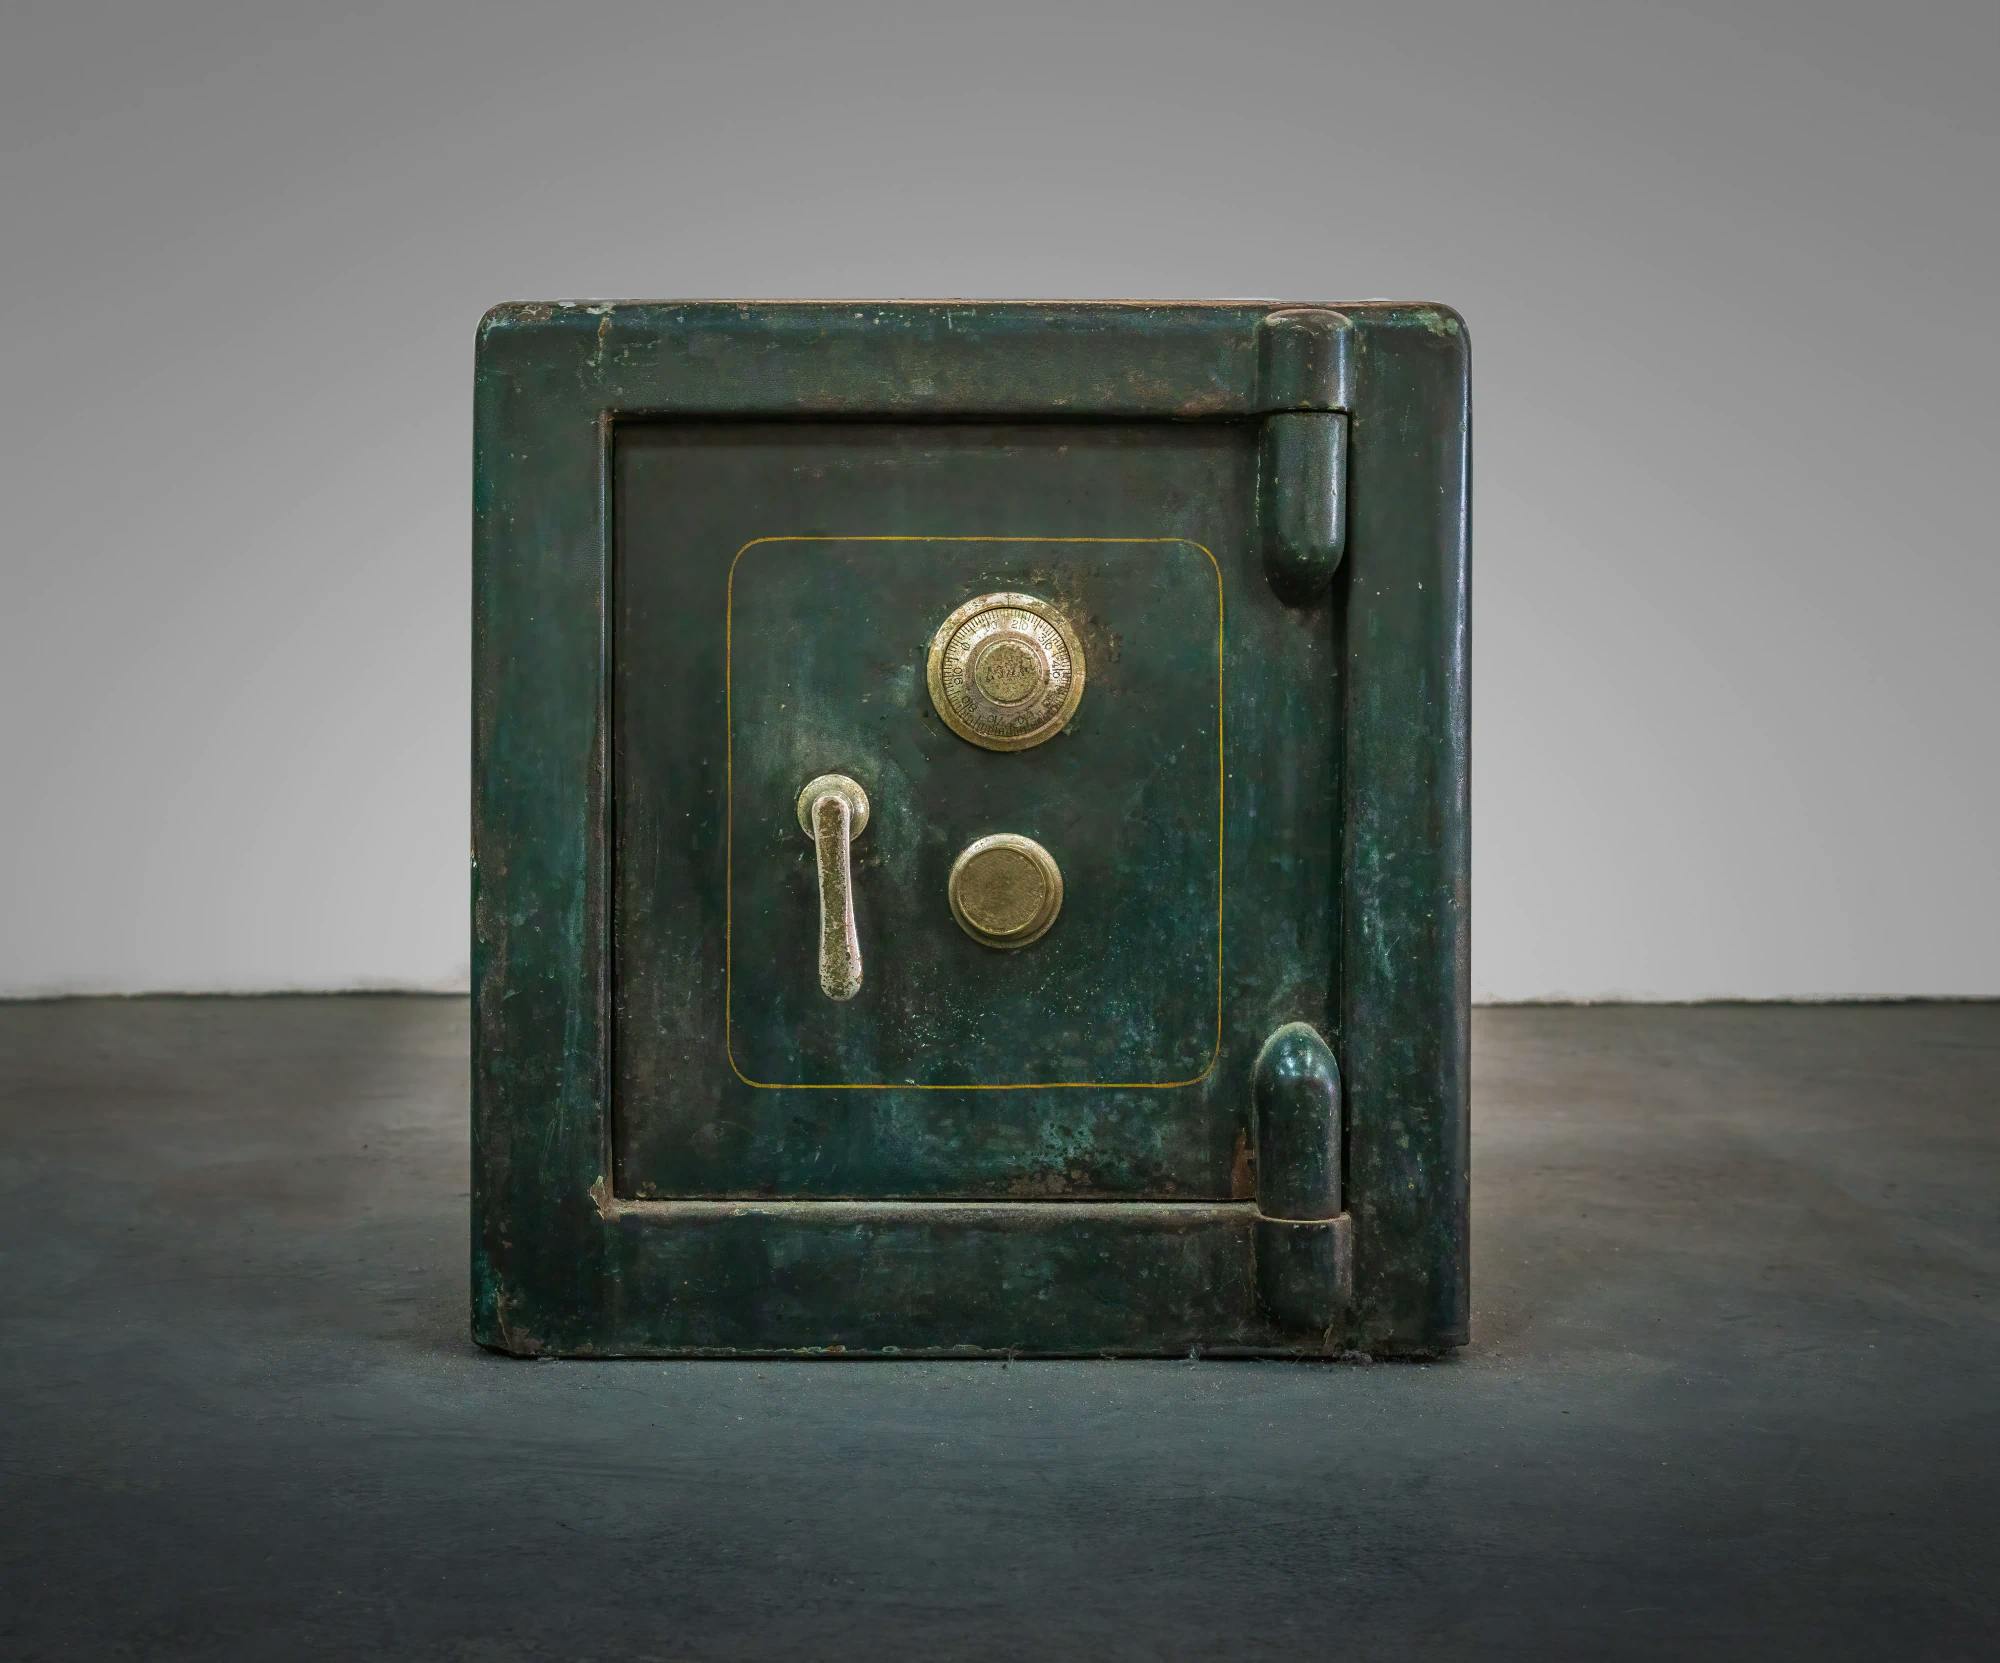 Large antique safe with a green patina.